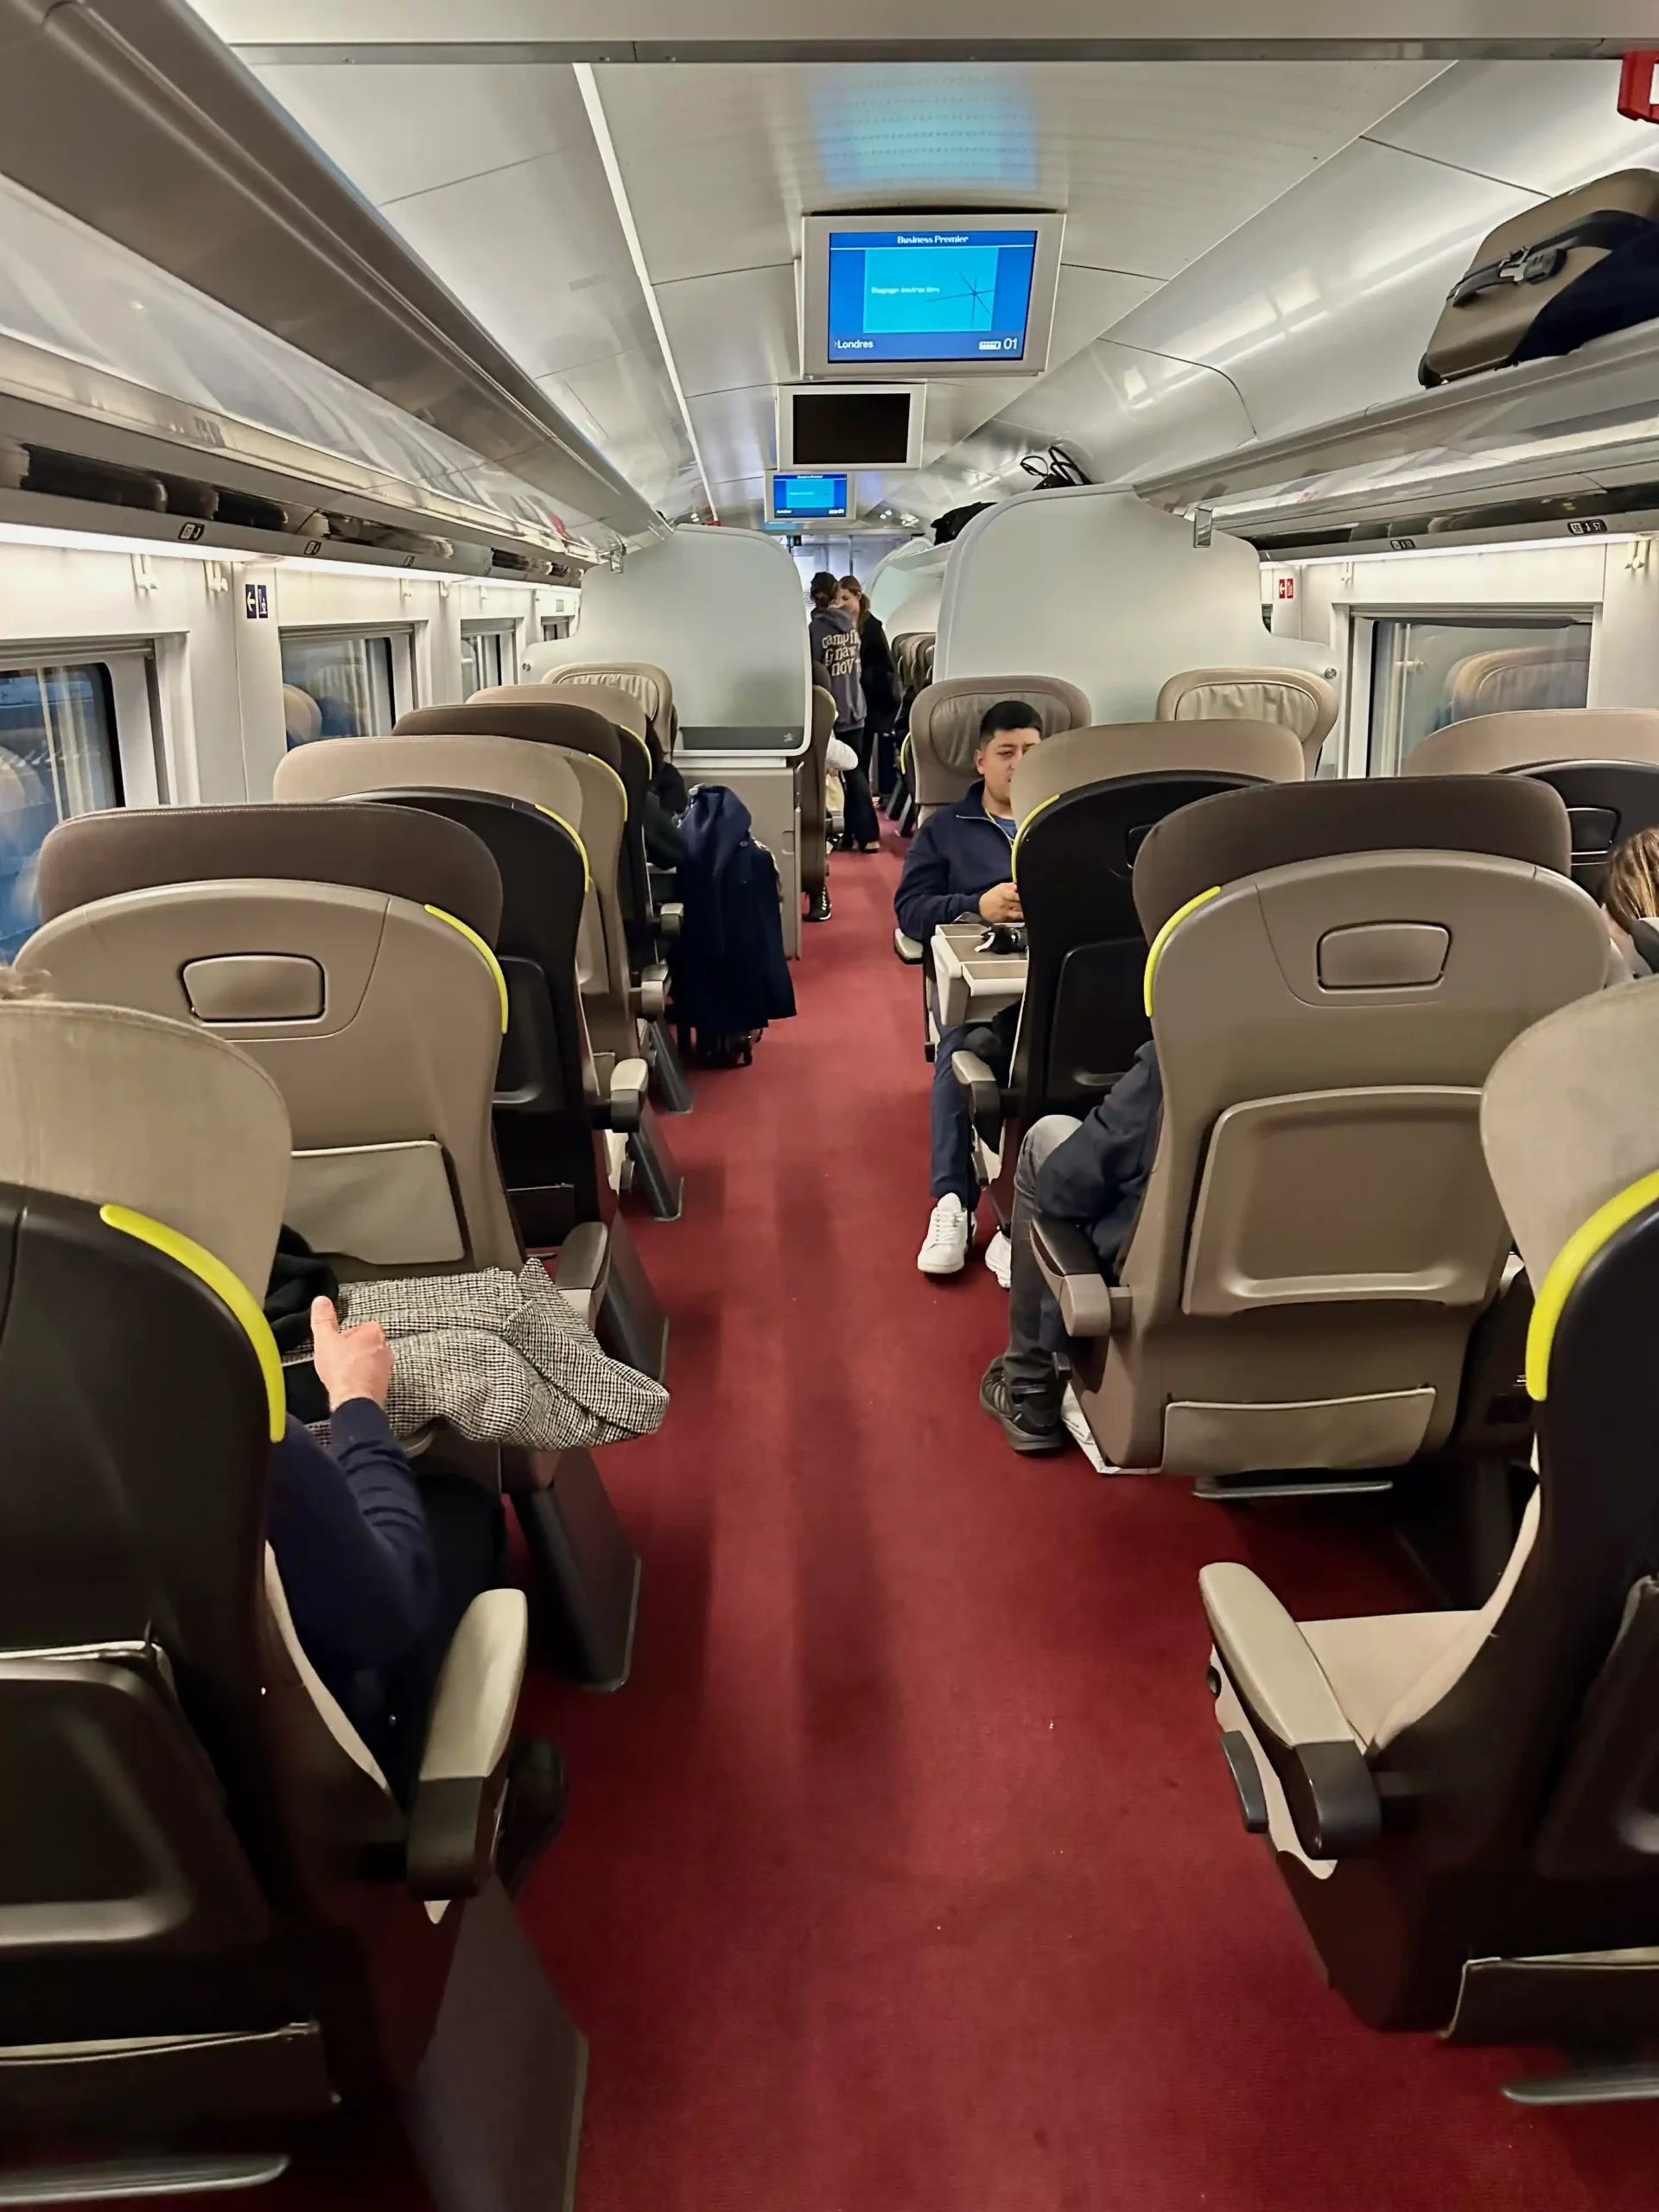 a group of people sitting on chairs in a train